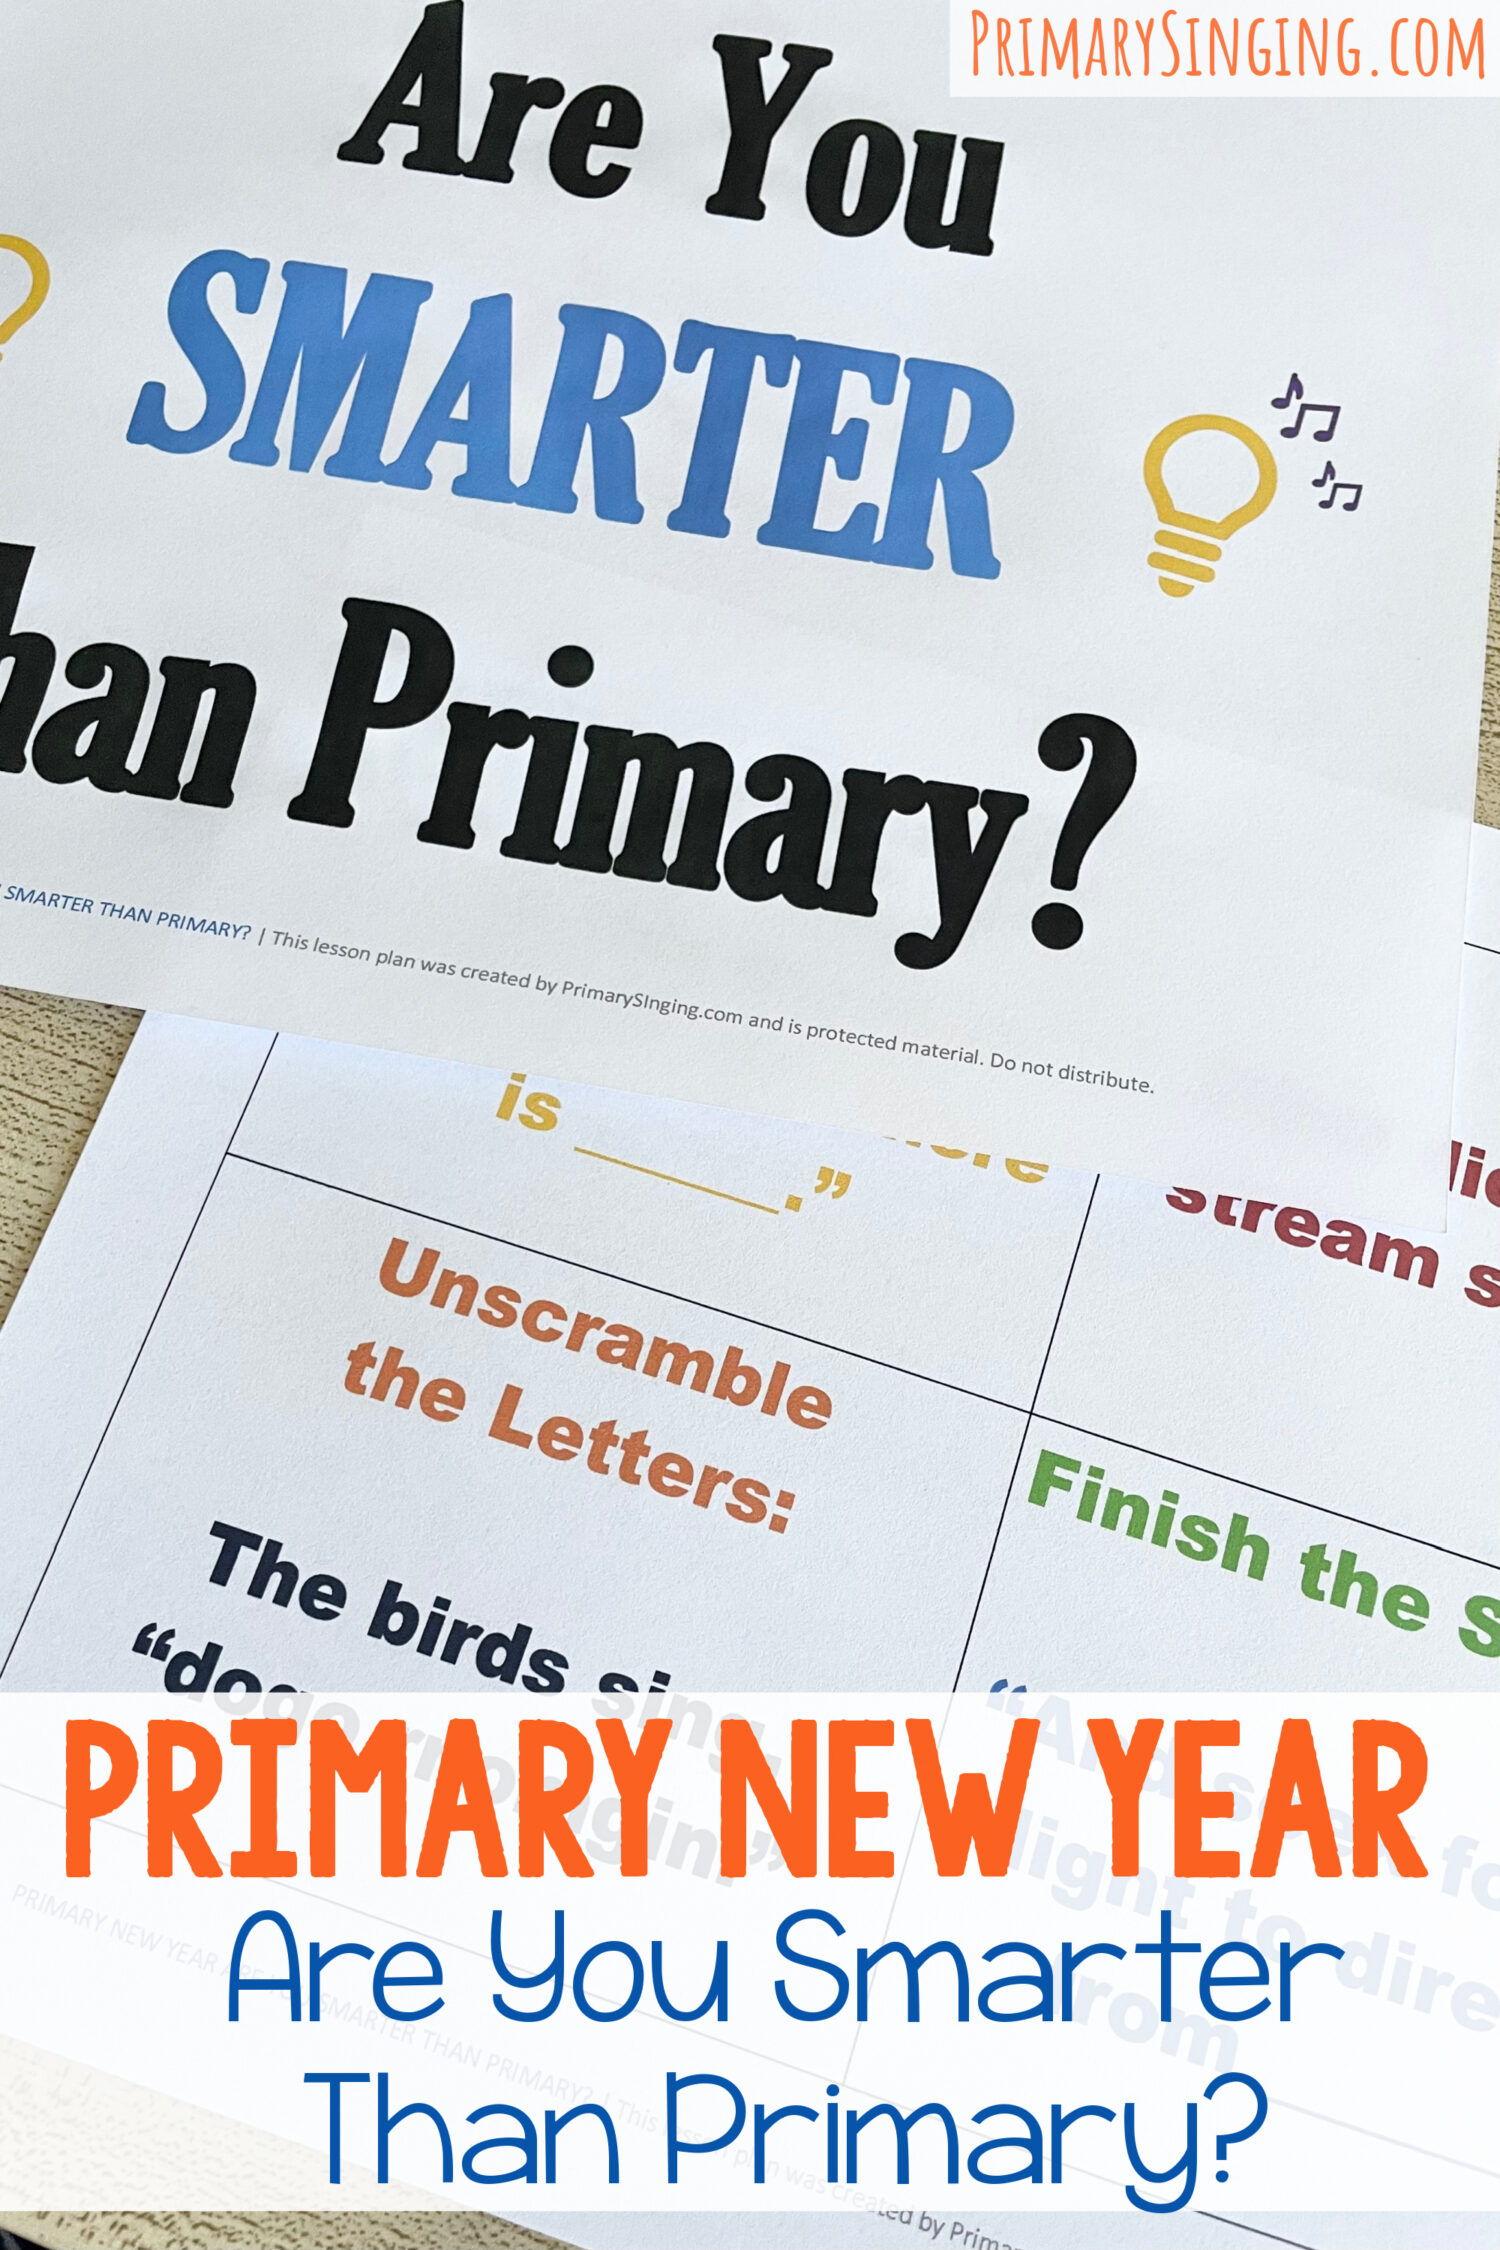 Primary New Year Are You Smarter Than Primary - Use this fun song quiz game to review primary songs for the new year with printable song helps for LDS Primary Music Leaders.